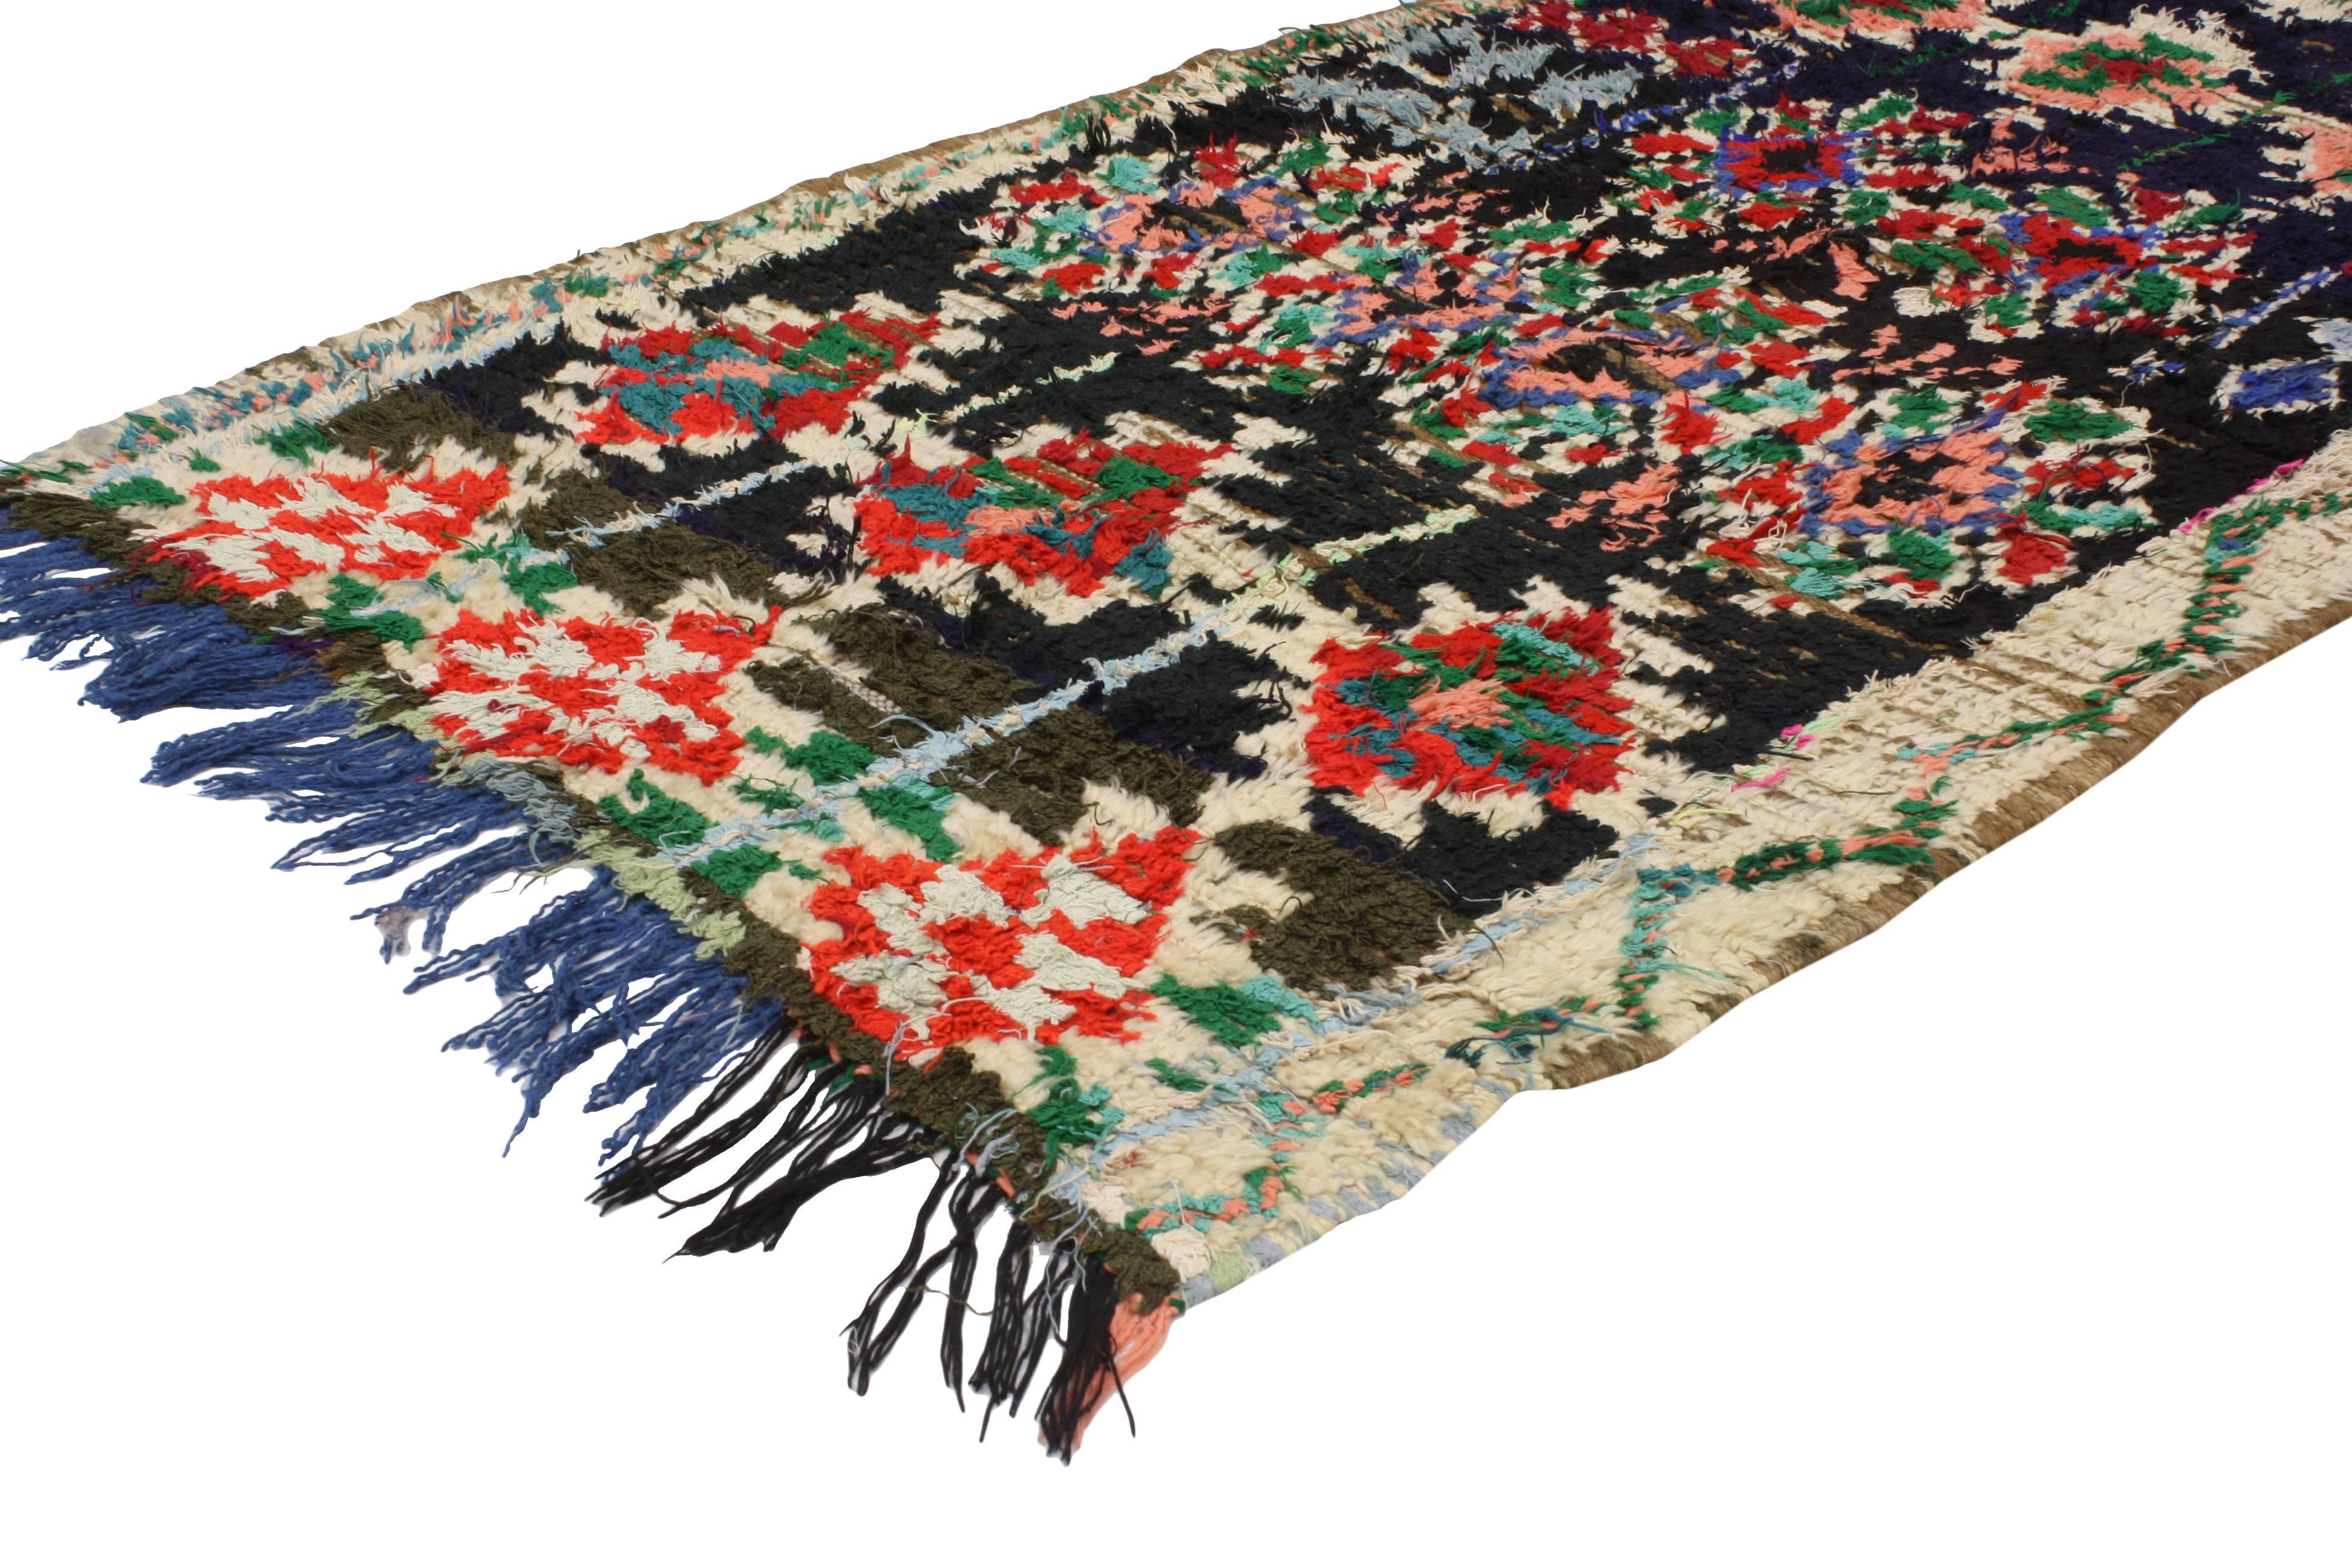 20460 Vintage Berber Moroccan Boucherouite Rug with Tribal Style and Memphis Design. This vintage Berber Moroccan Boucherouite rug is one of a kind, as it projects vivacious color, intricate geometric pattern and carries deep meaning woven within